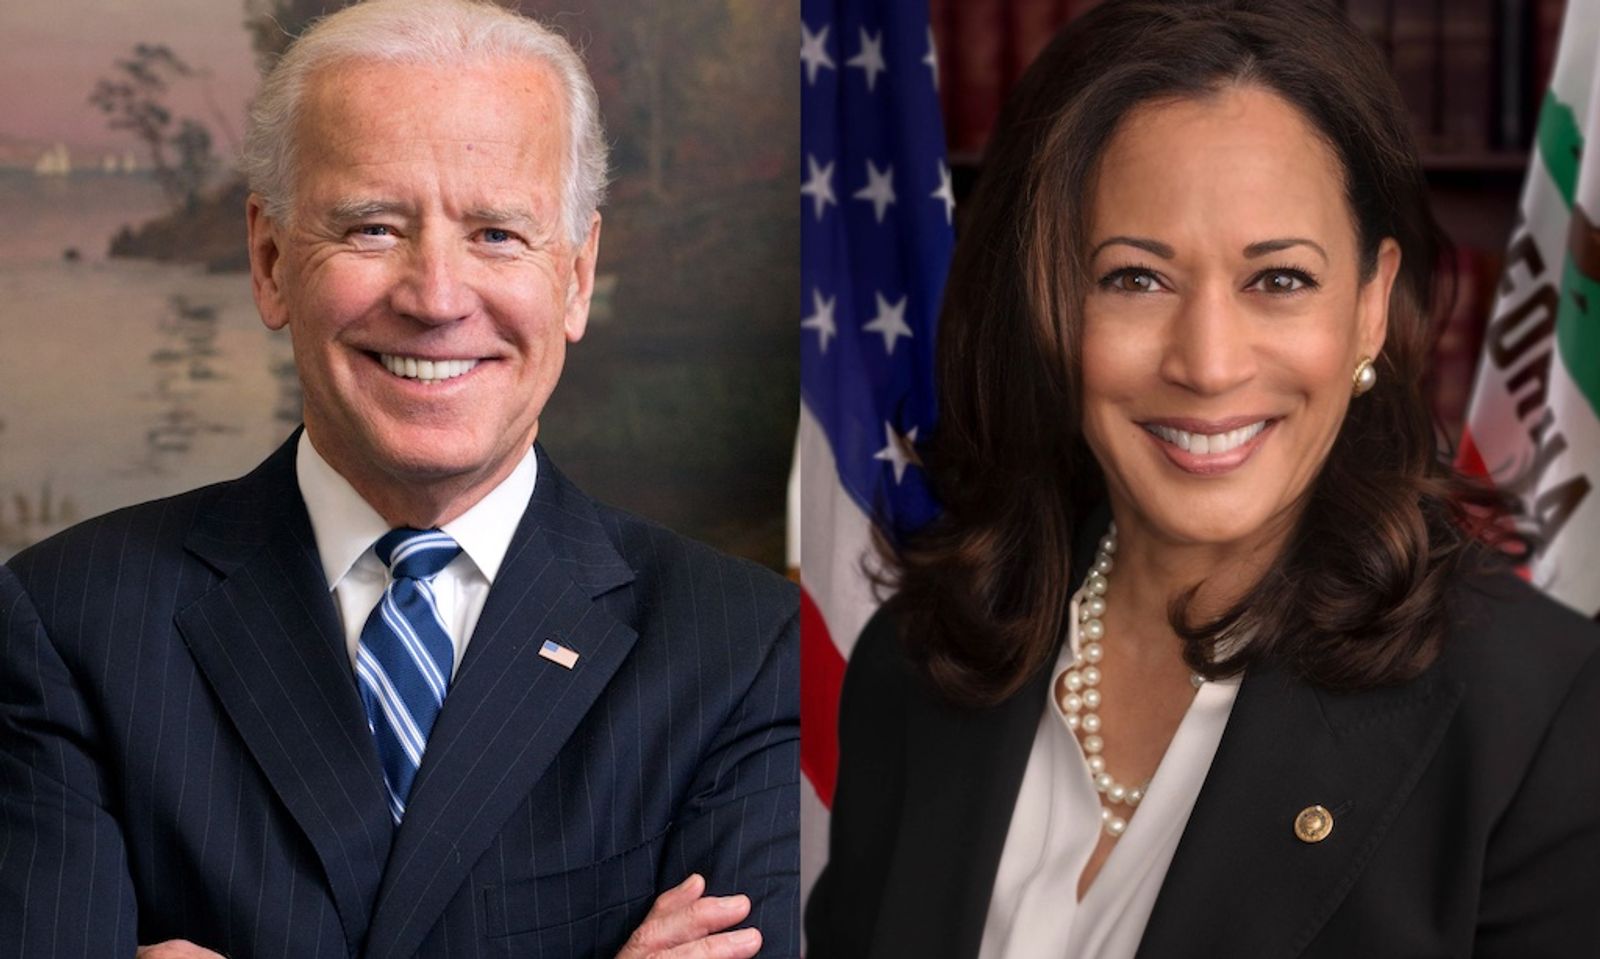 Biden/Harris Election Win May Not Be Good News for Sex Workers